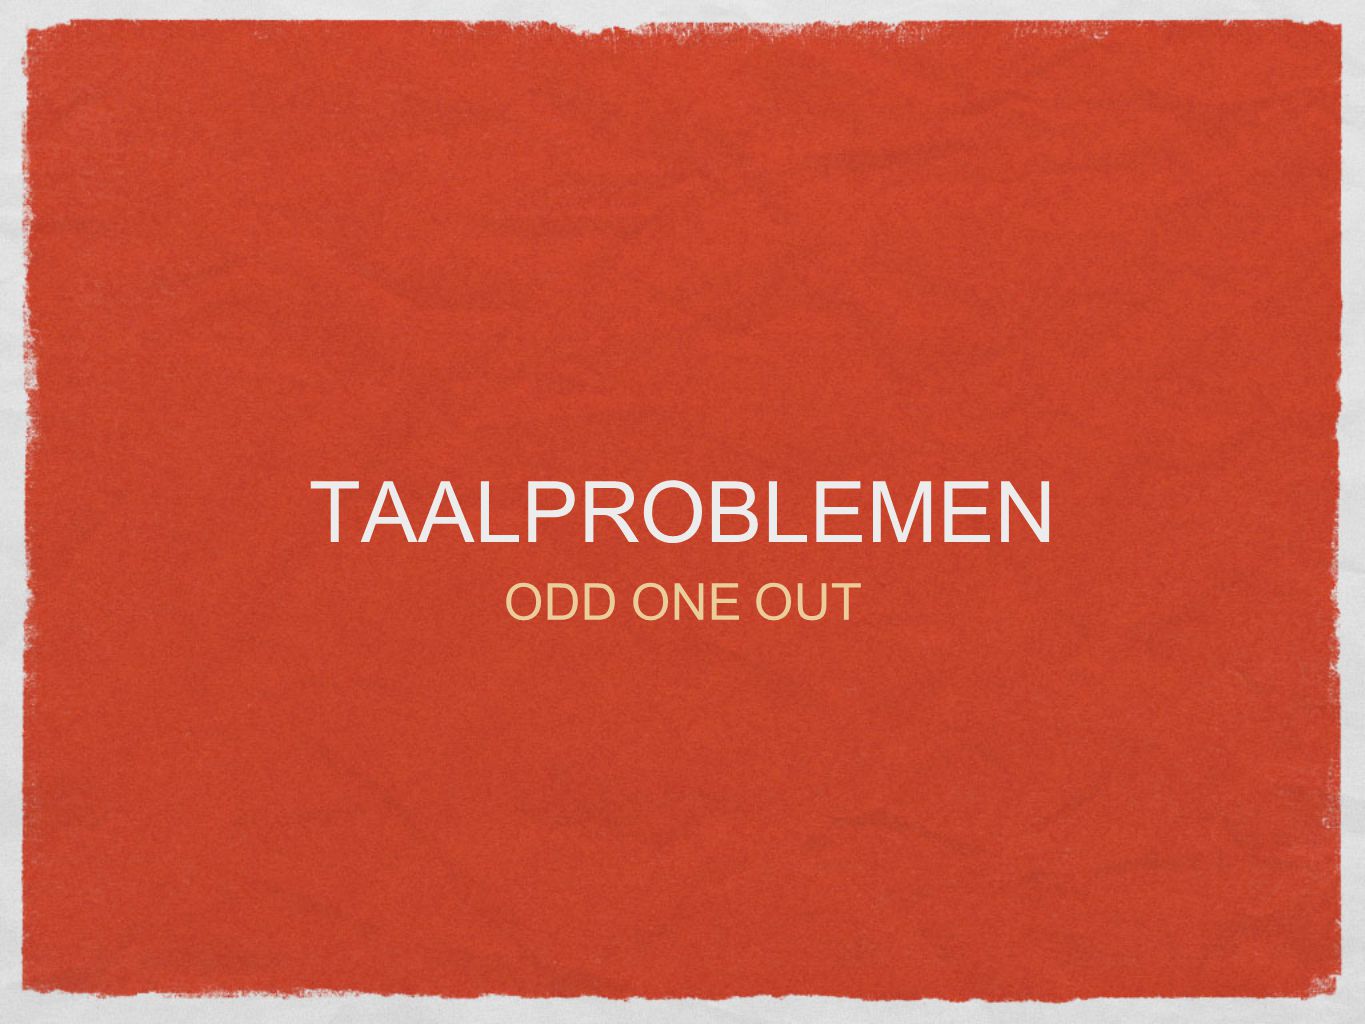 TAALPROBLEMEN ODD ONE OUT